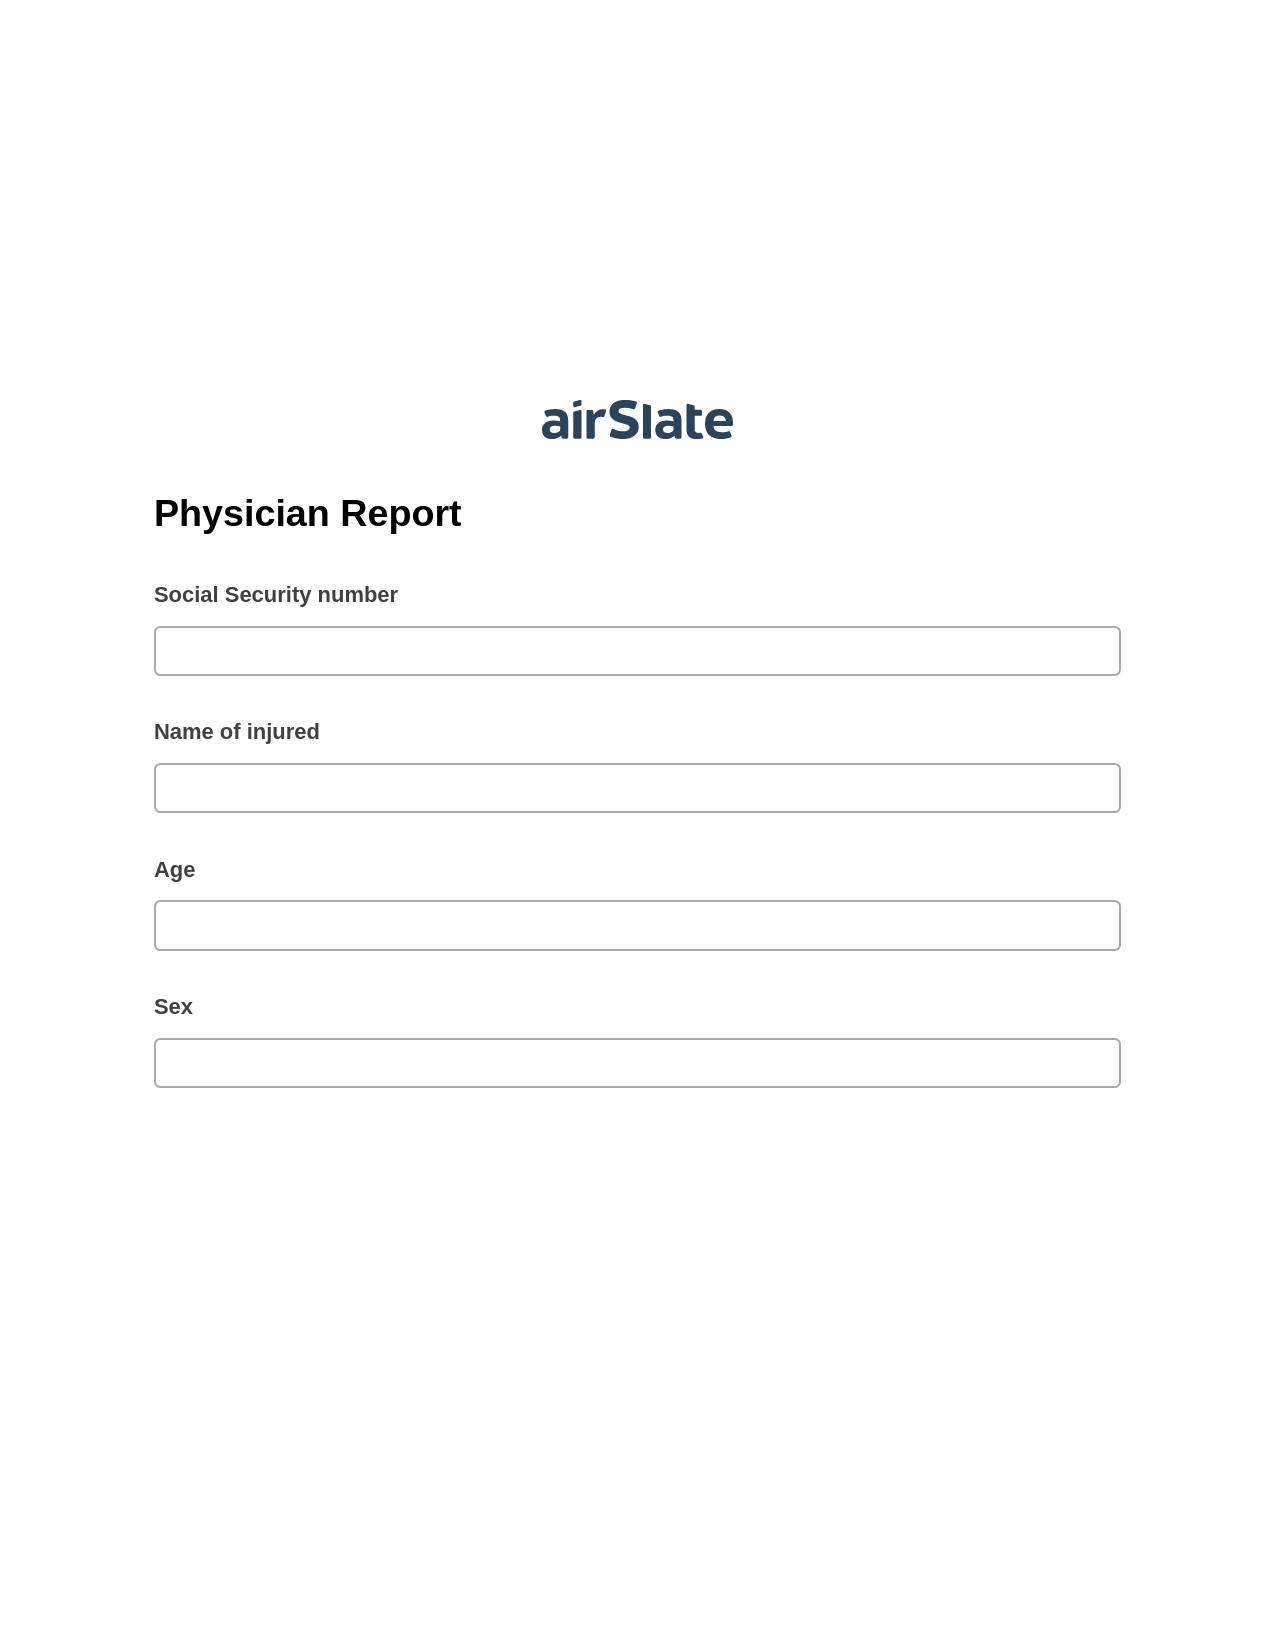 Physician Report Pre-fill from CSV File Bot, Email Notification Bot, Archive to OneDrive Bot